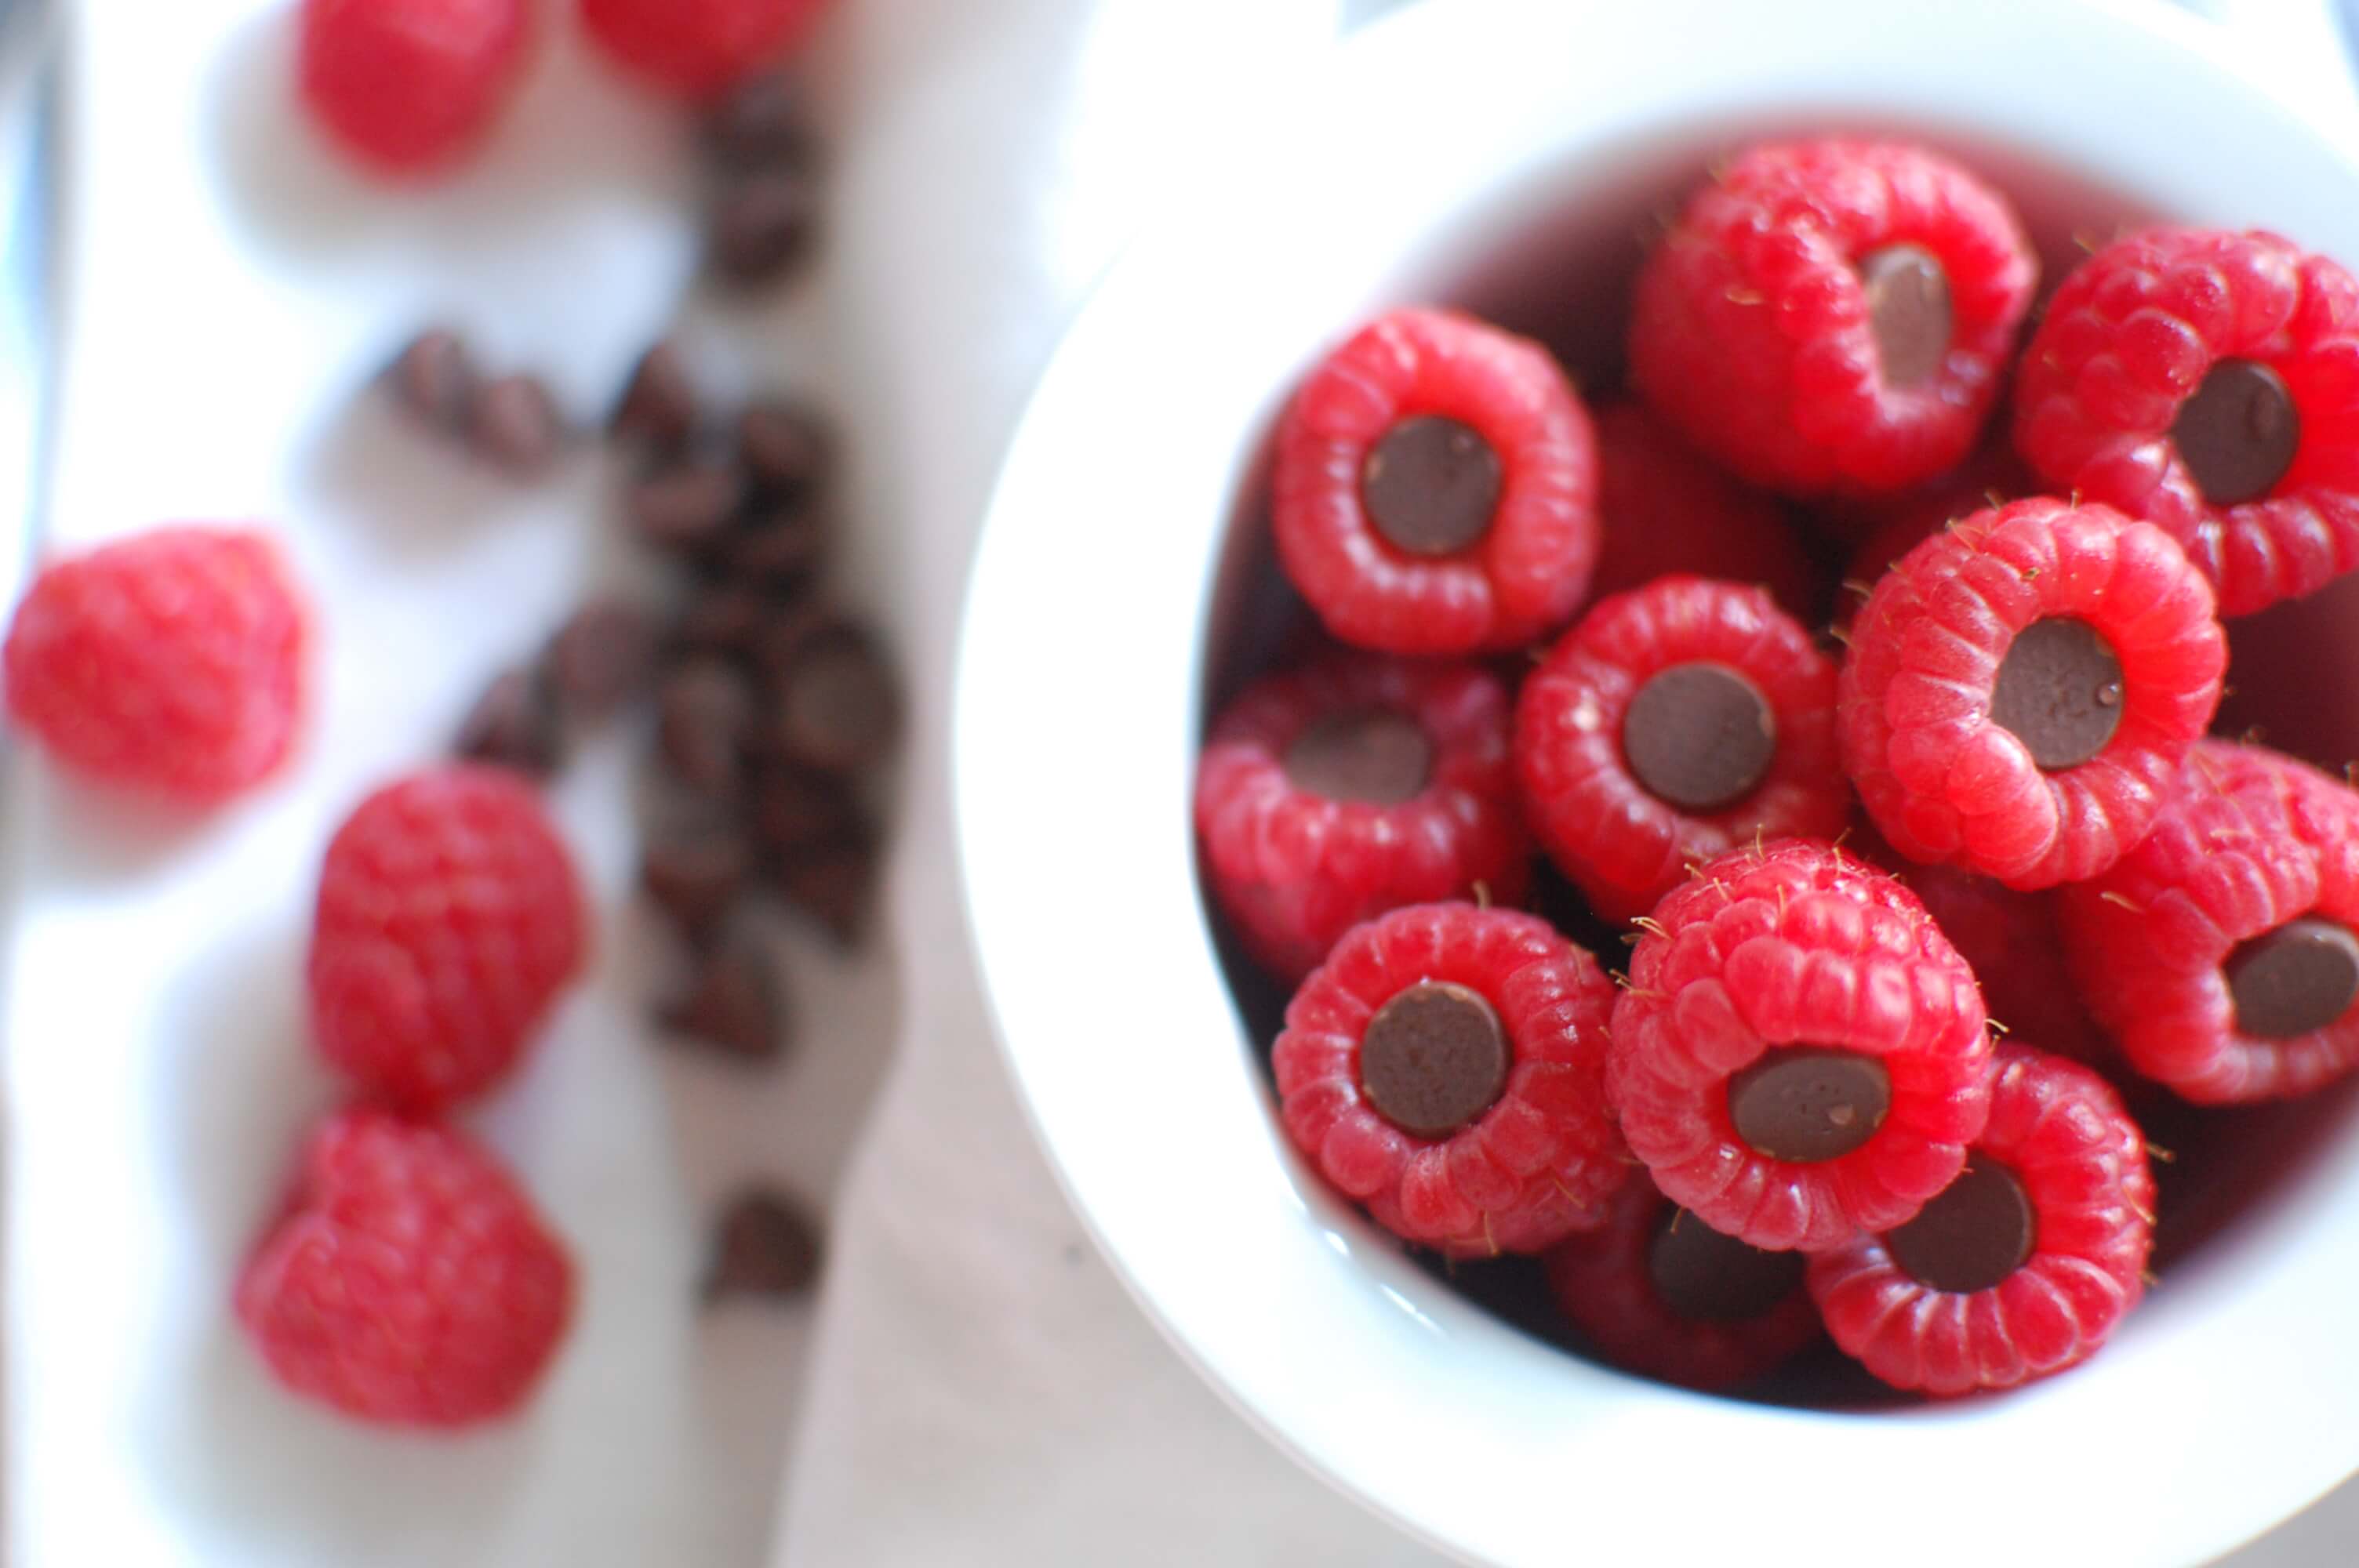 20 Meal Ideas to Help Clients with Eczema: Chocolate Stuffed Raspberries